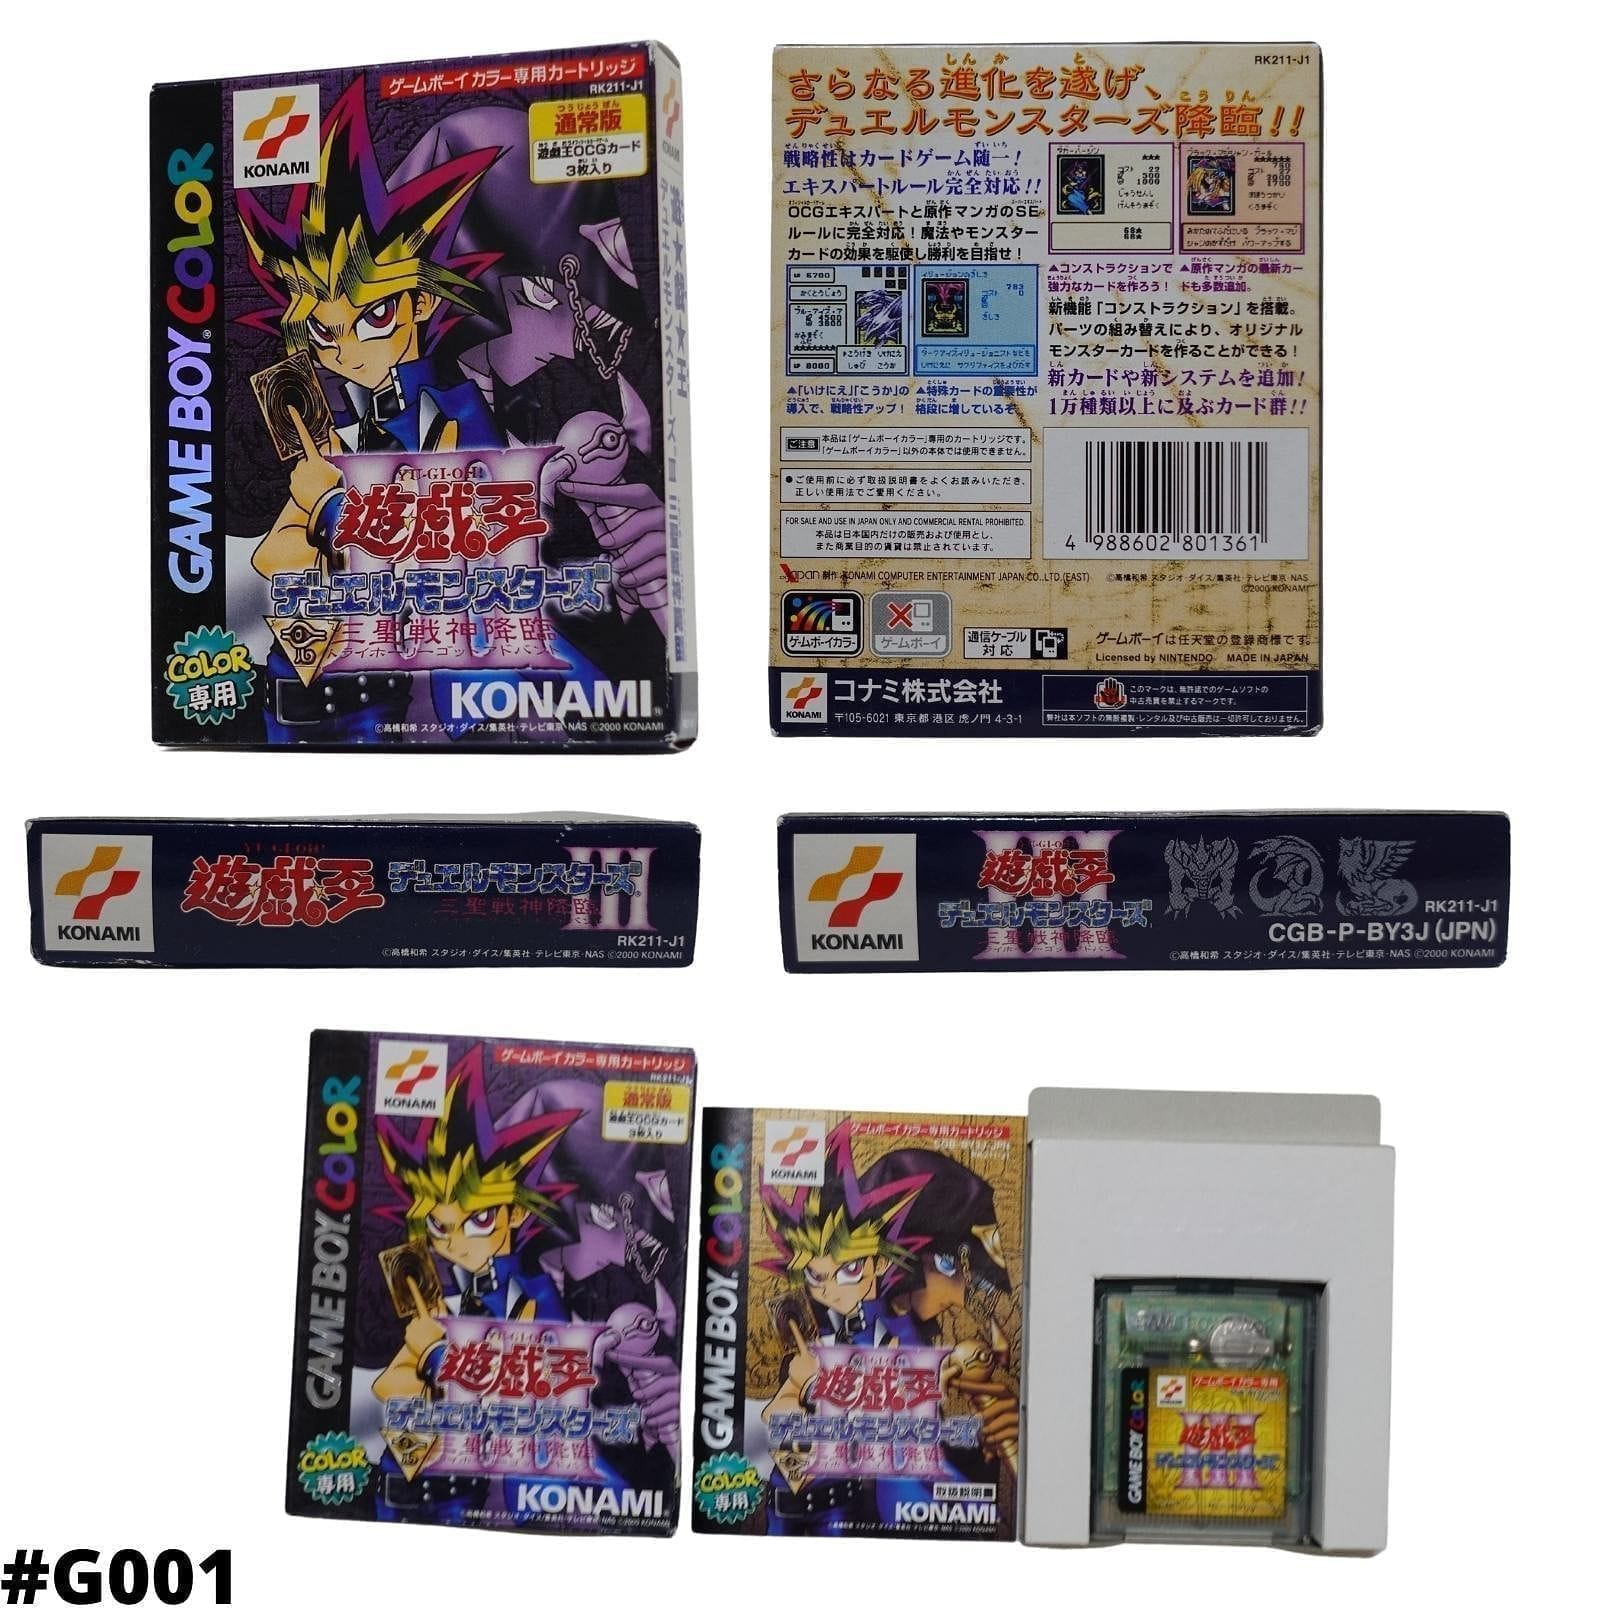 Yu-Gi-Oh! Duel Monsters III : Tri-Holy God Advent | Game Boy Color ChitoroShop